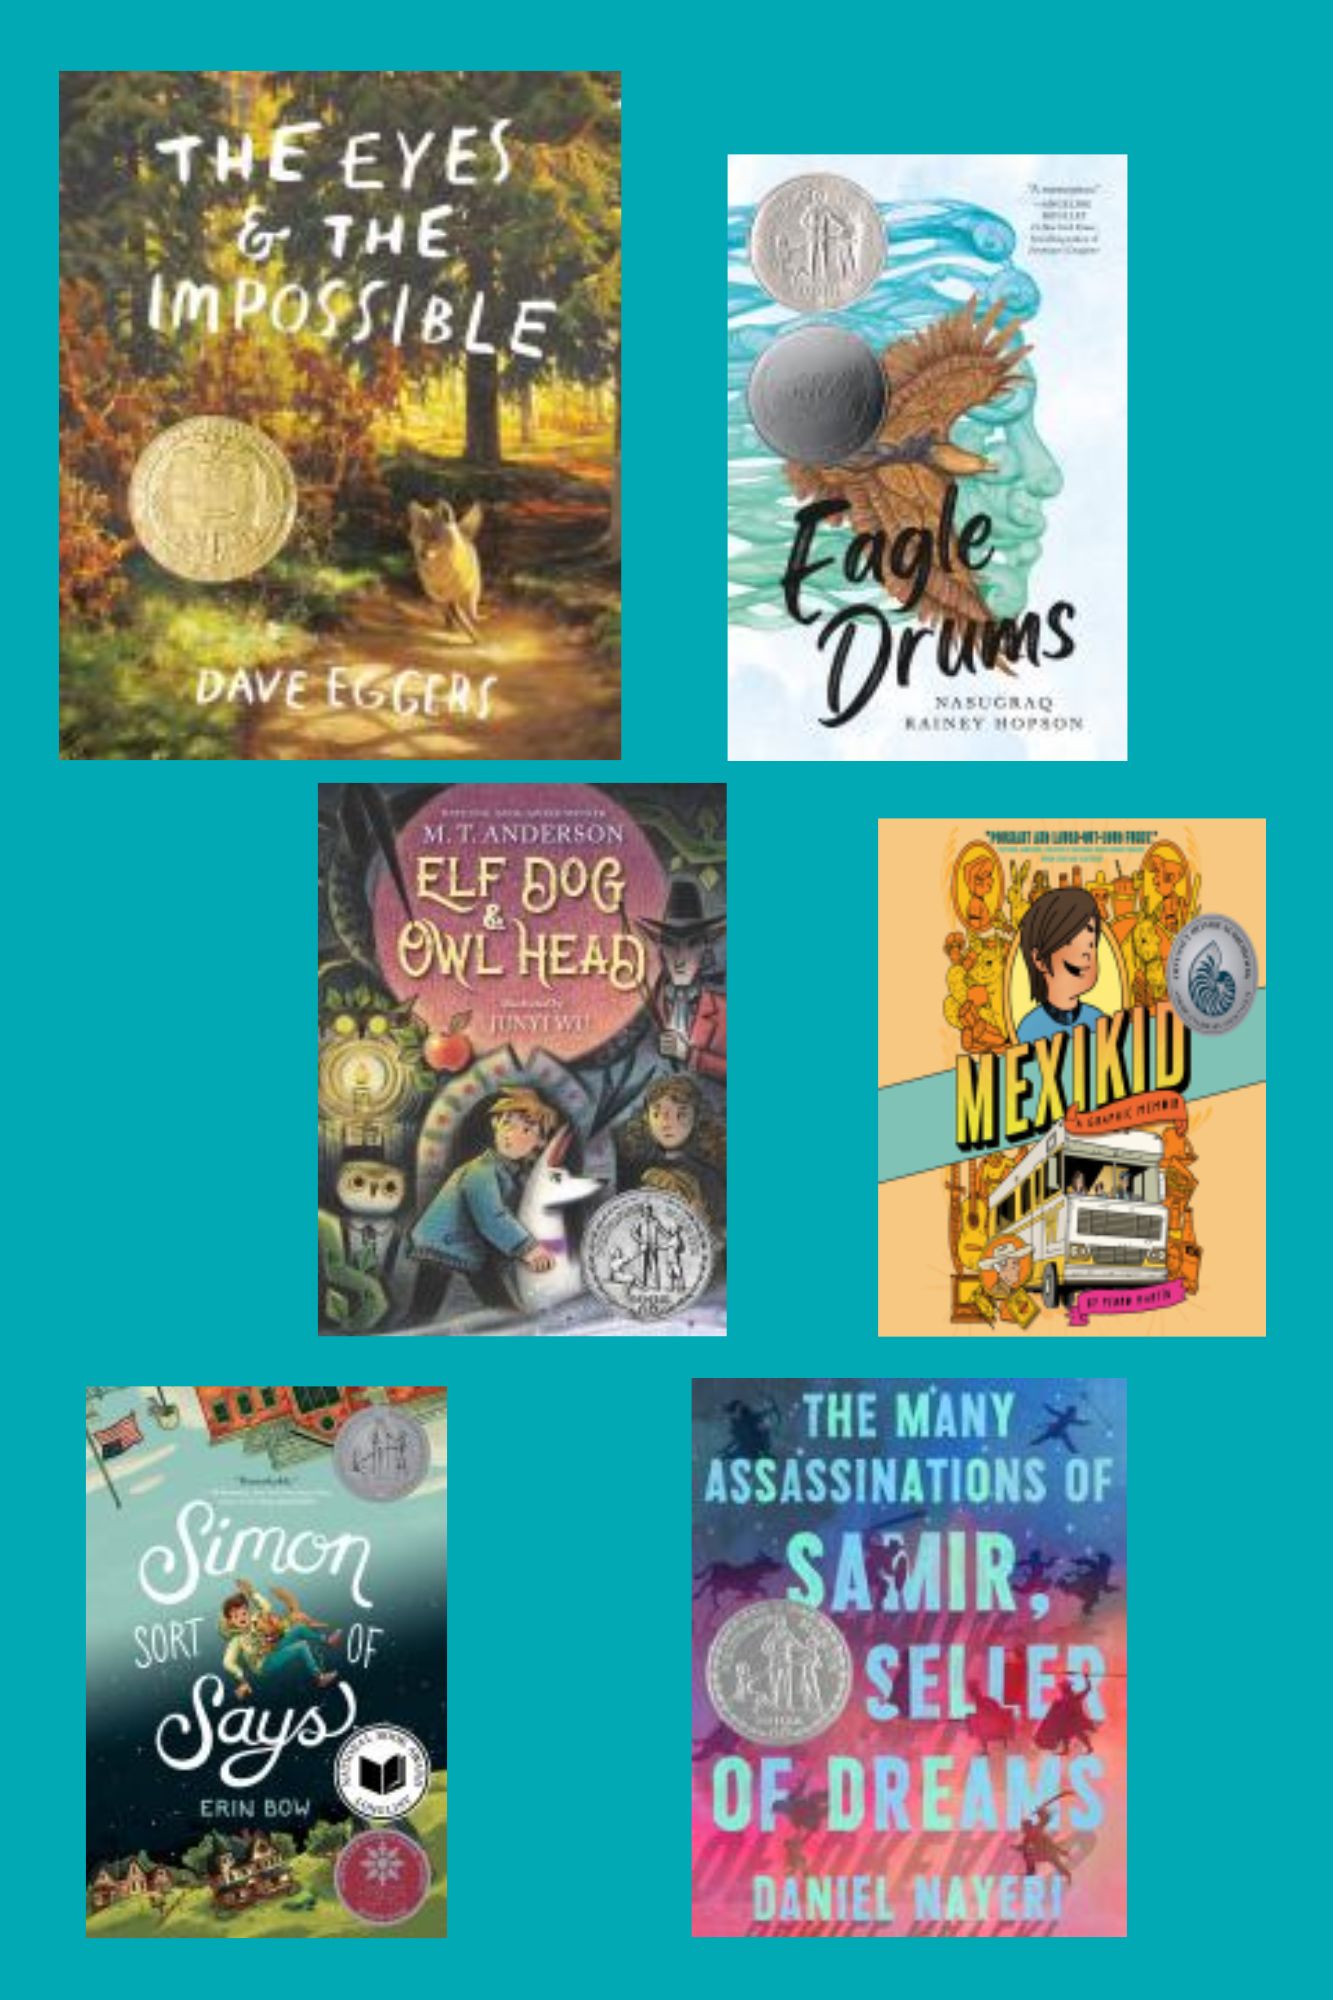 A collage of the five Newbury Award winners book covers including author name, with a turquoise colored background 